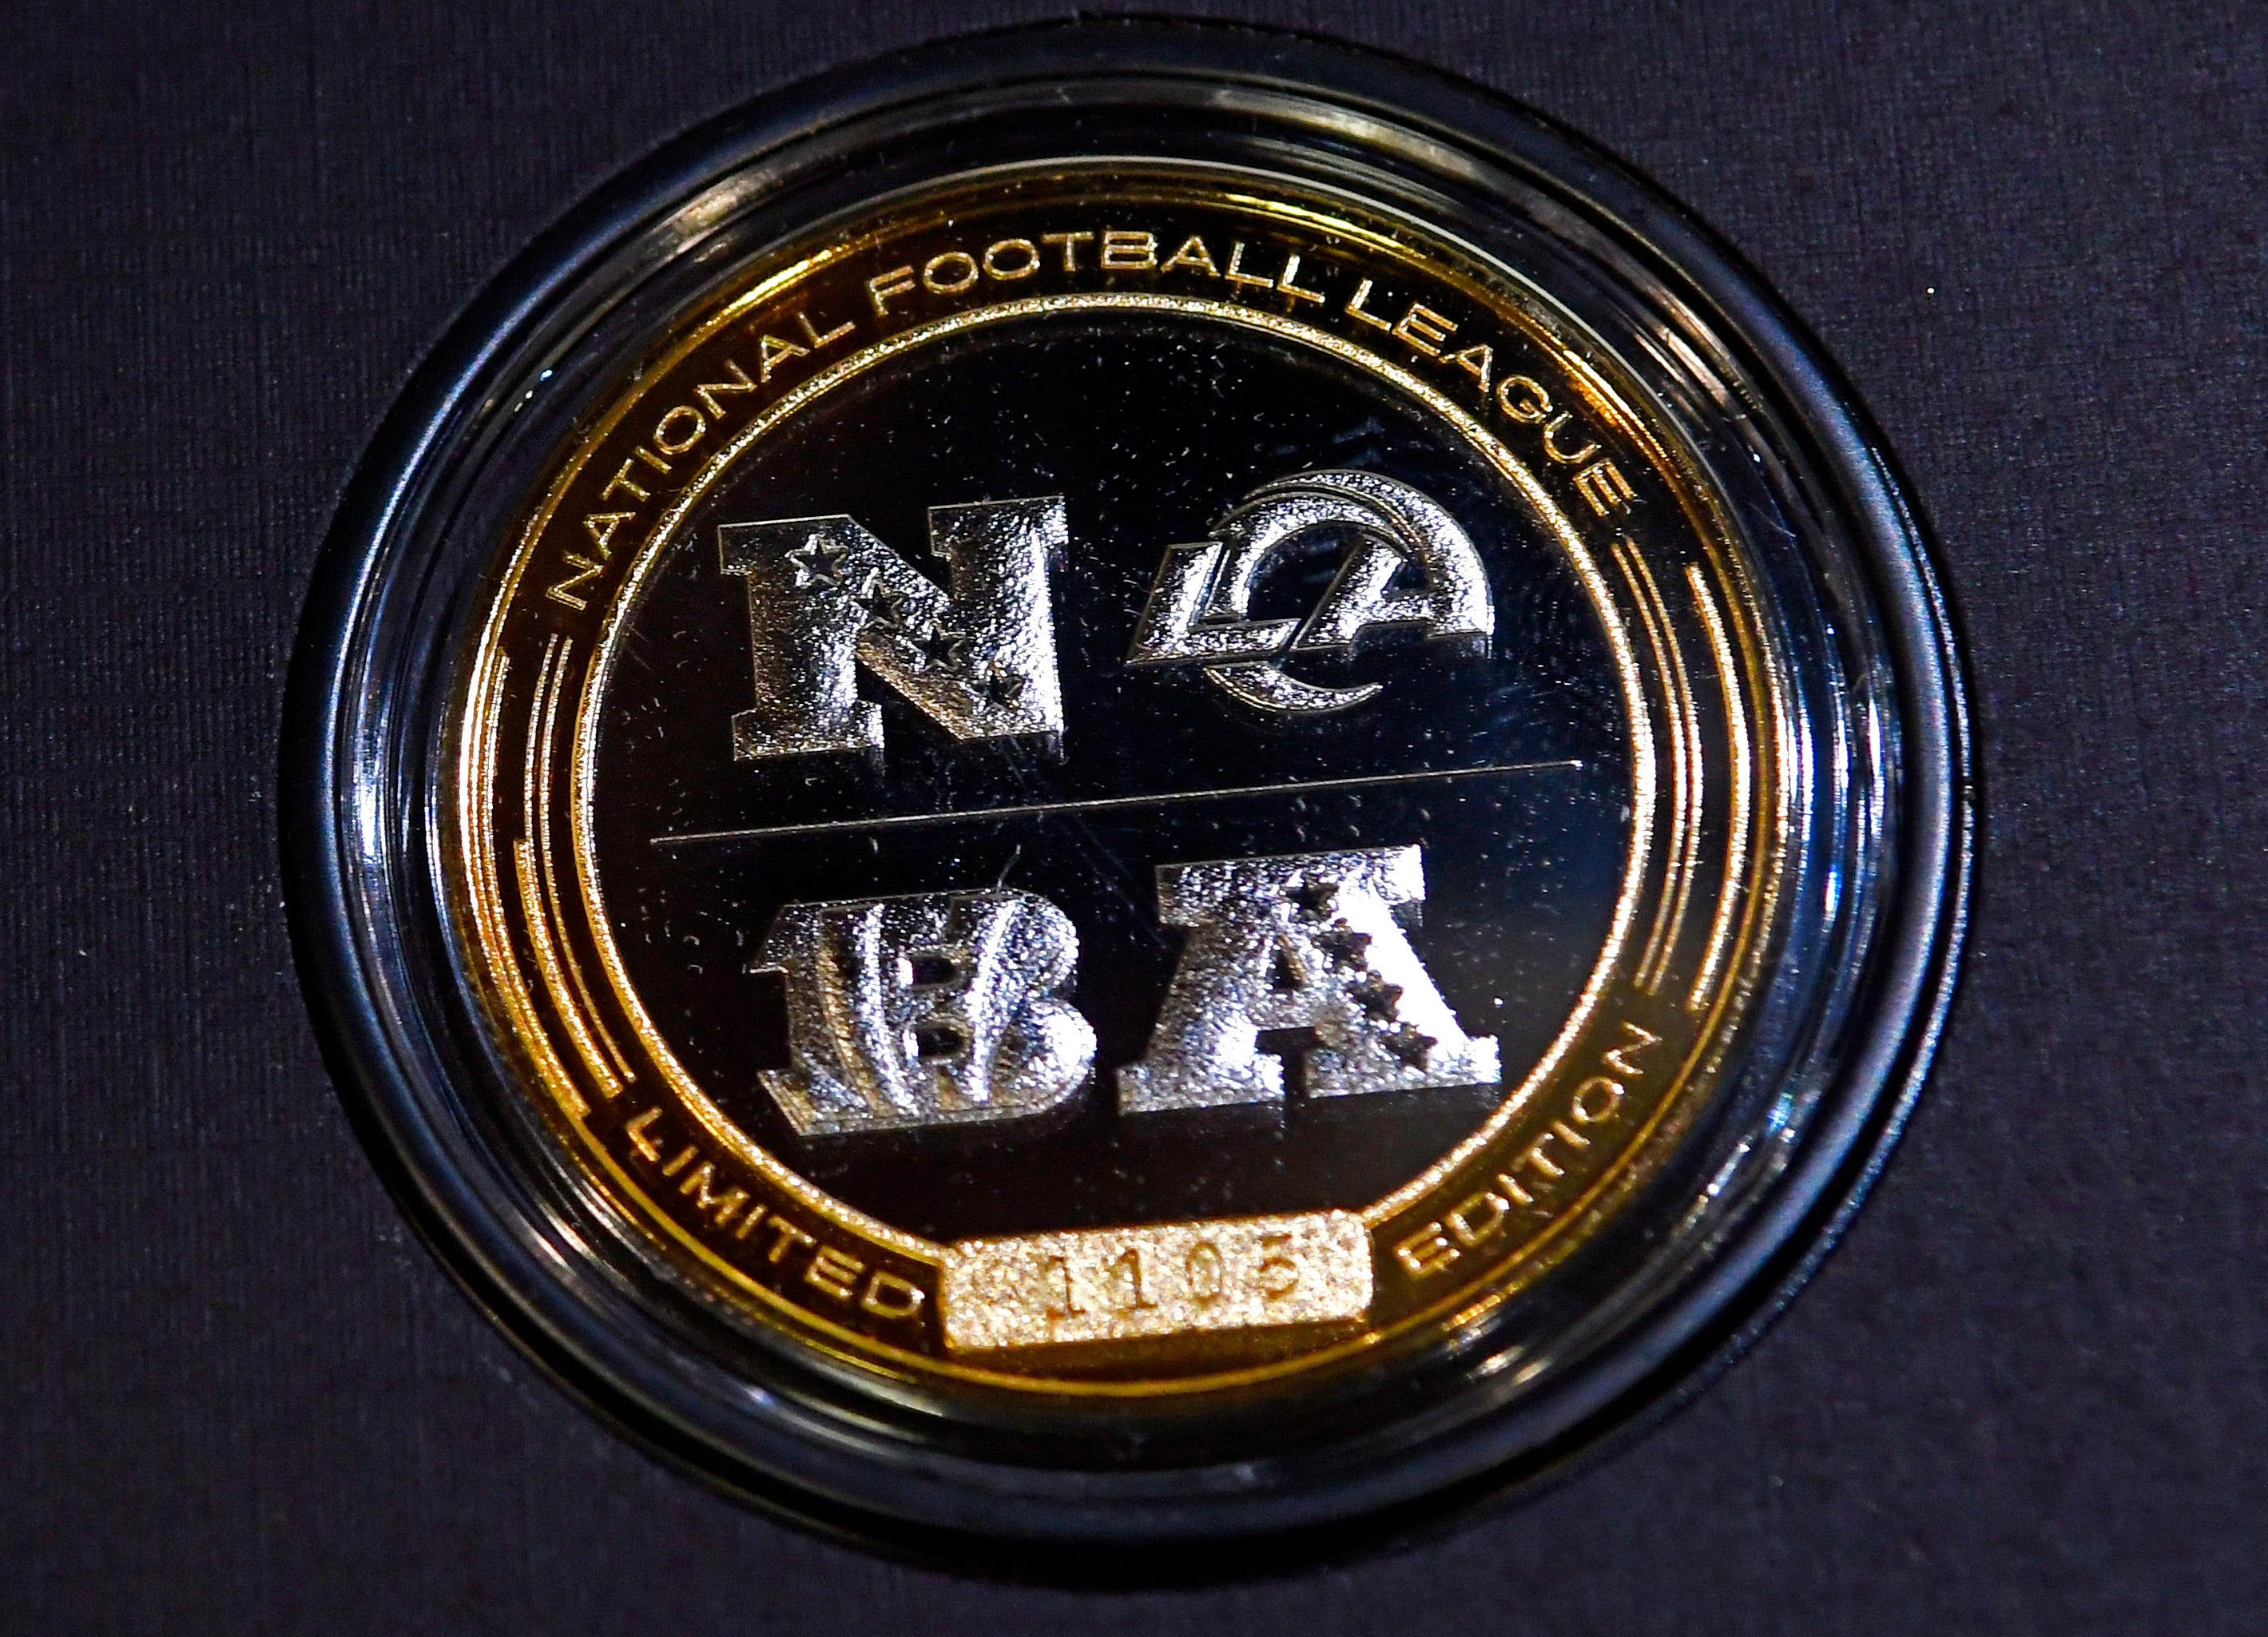 Highmand Mint Super Bowl XLV Packers Steelers Flip Coin # out of 10,000 